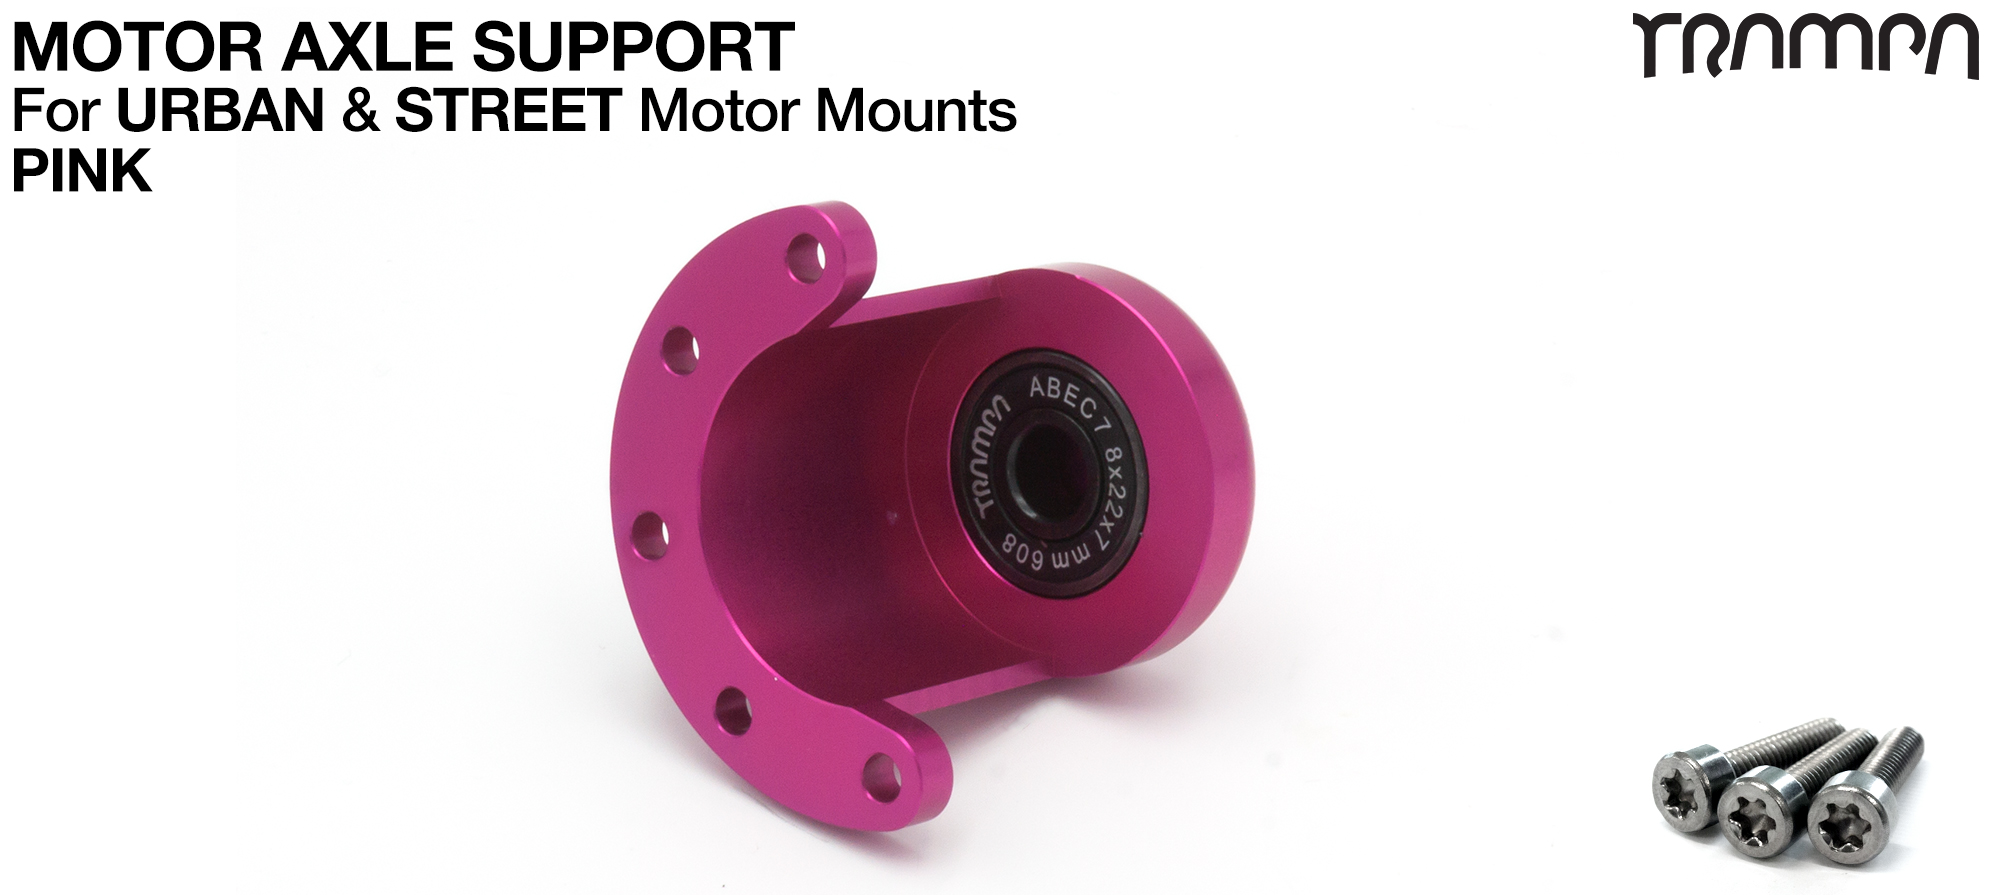 Motor Axle Support Housing with TRAMPA R608 8x22x7mm Bearing, C-Clip & Stainless Steel fixing Bolts for Mini Spring Truck MKII CARVE Motor Mounts UNIVERSAL - PINK